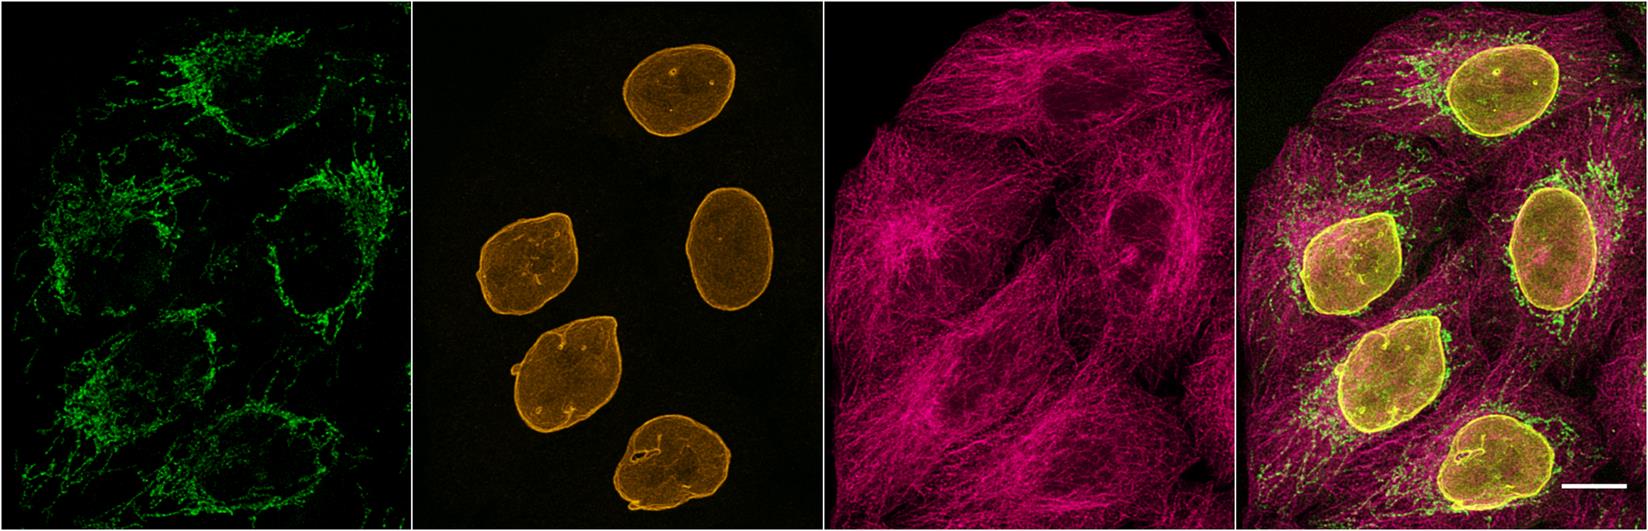 HeLa cells were immunostained with mouse IgG2b anti-βTubulin antibody + alpaca anti-mouse IgG2b VHH Alexa Fluor® 568 (red). Nuclei were stained with DAPI (blue). Scale bar, 10 μm. Images were recorded at the Core Facility Bioimaging at the Biomedical Center, LMU Munich